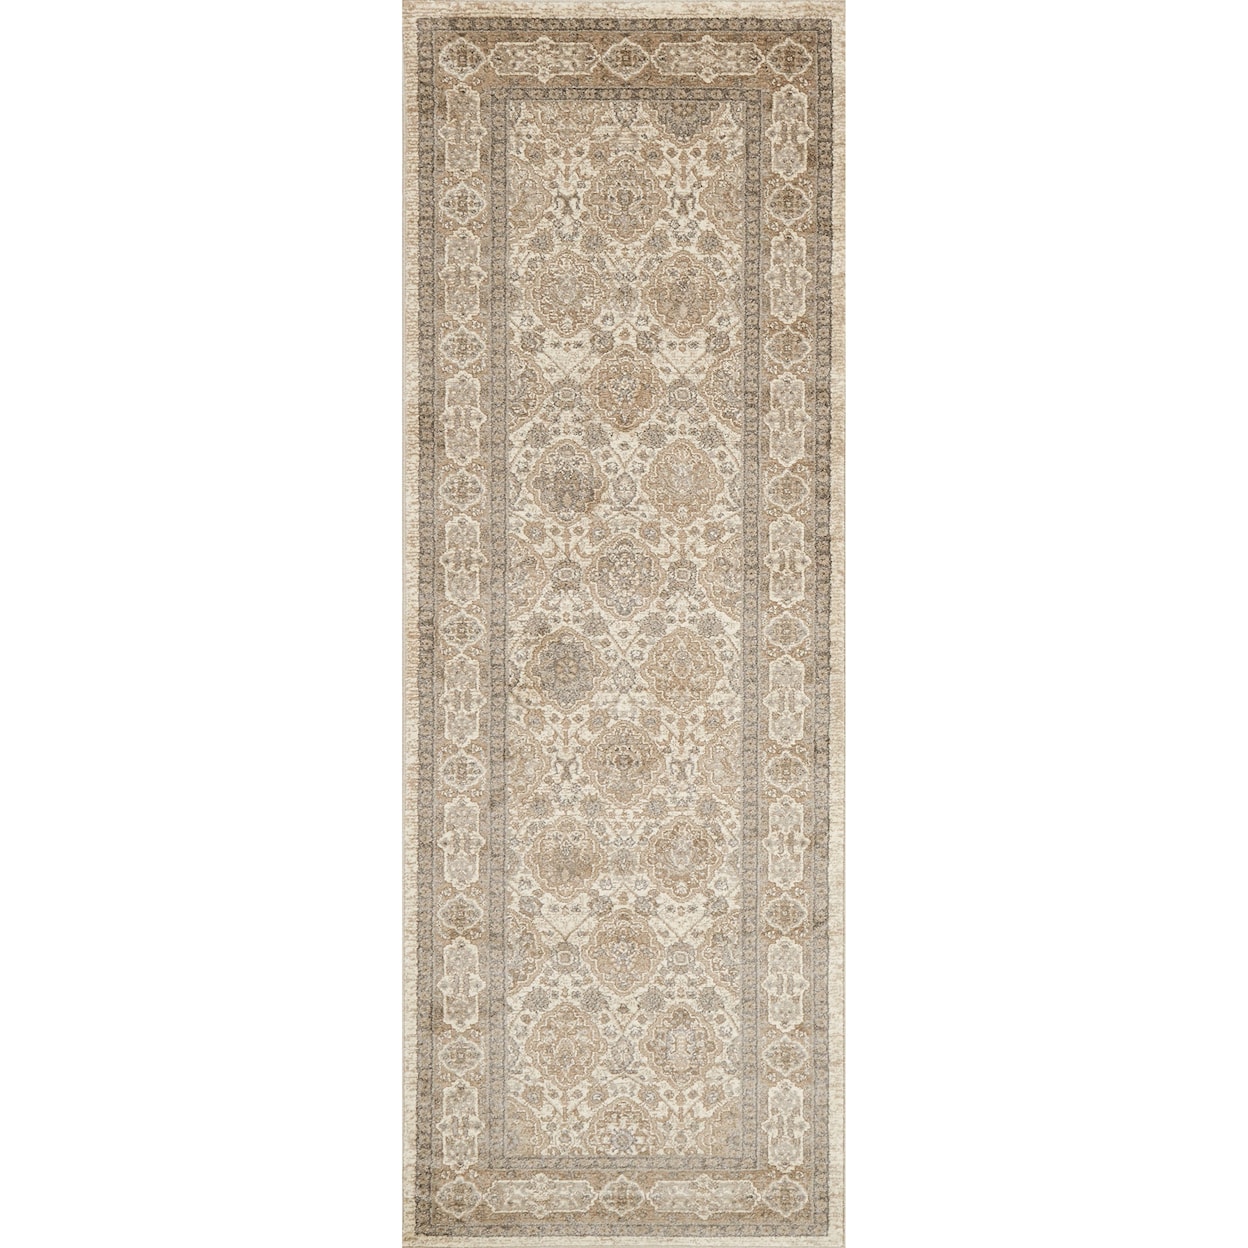 Reeds Rugs Century 1'6" x 1'6"  Sand / Taupe Rug